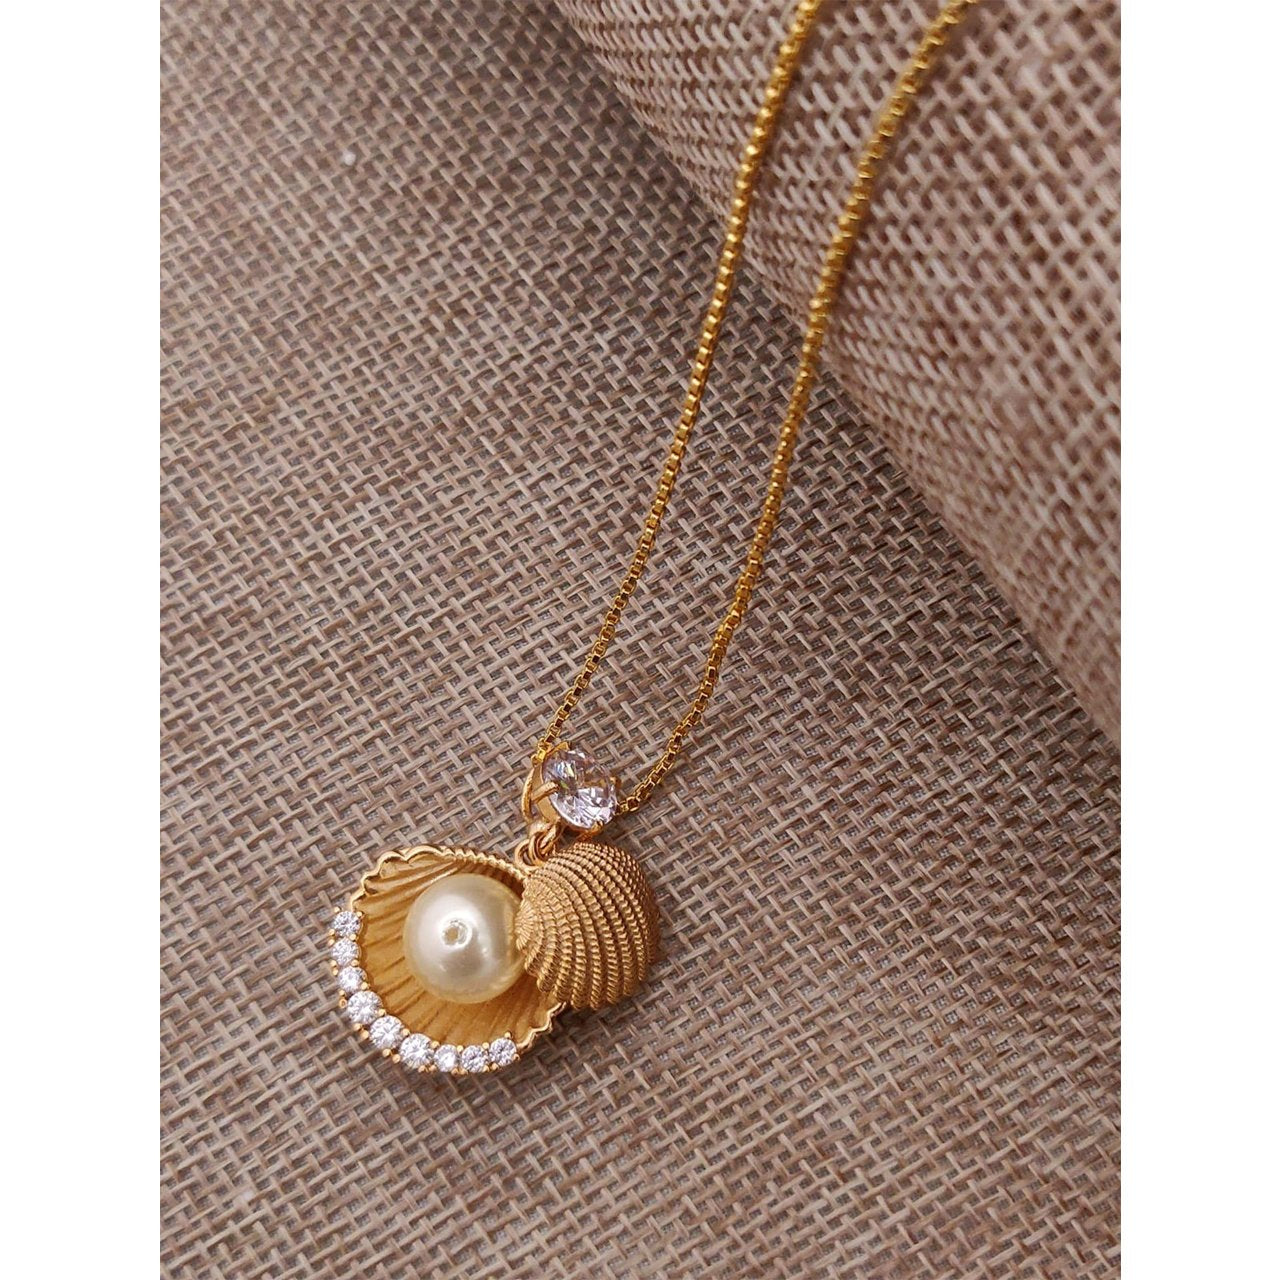 Shell Pearl Gold Copper Pendant Necklace Chain For Women